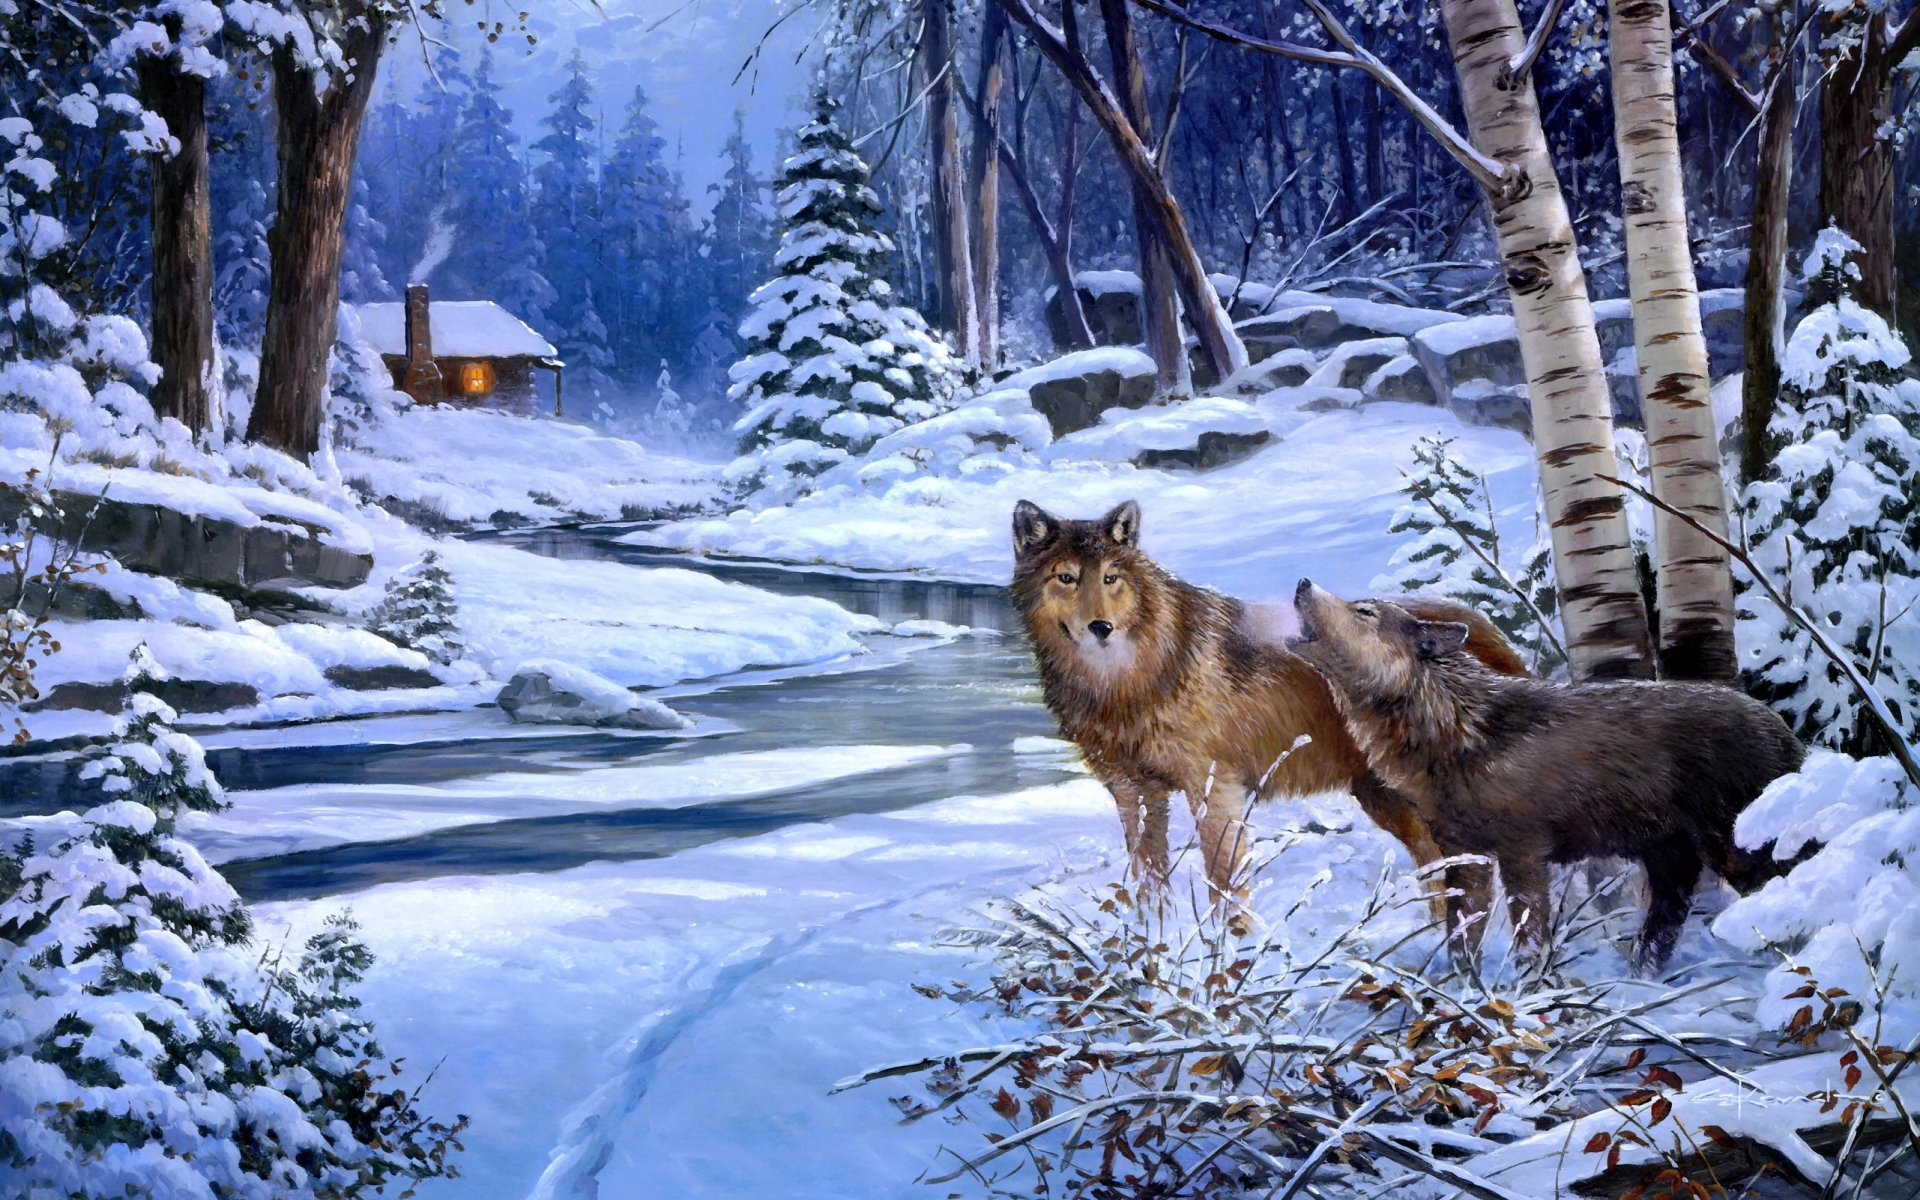  paintings landscapes winter snow rivers cabin winter snow rivers cabin